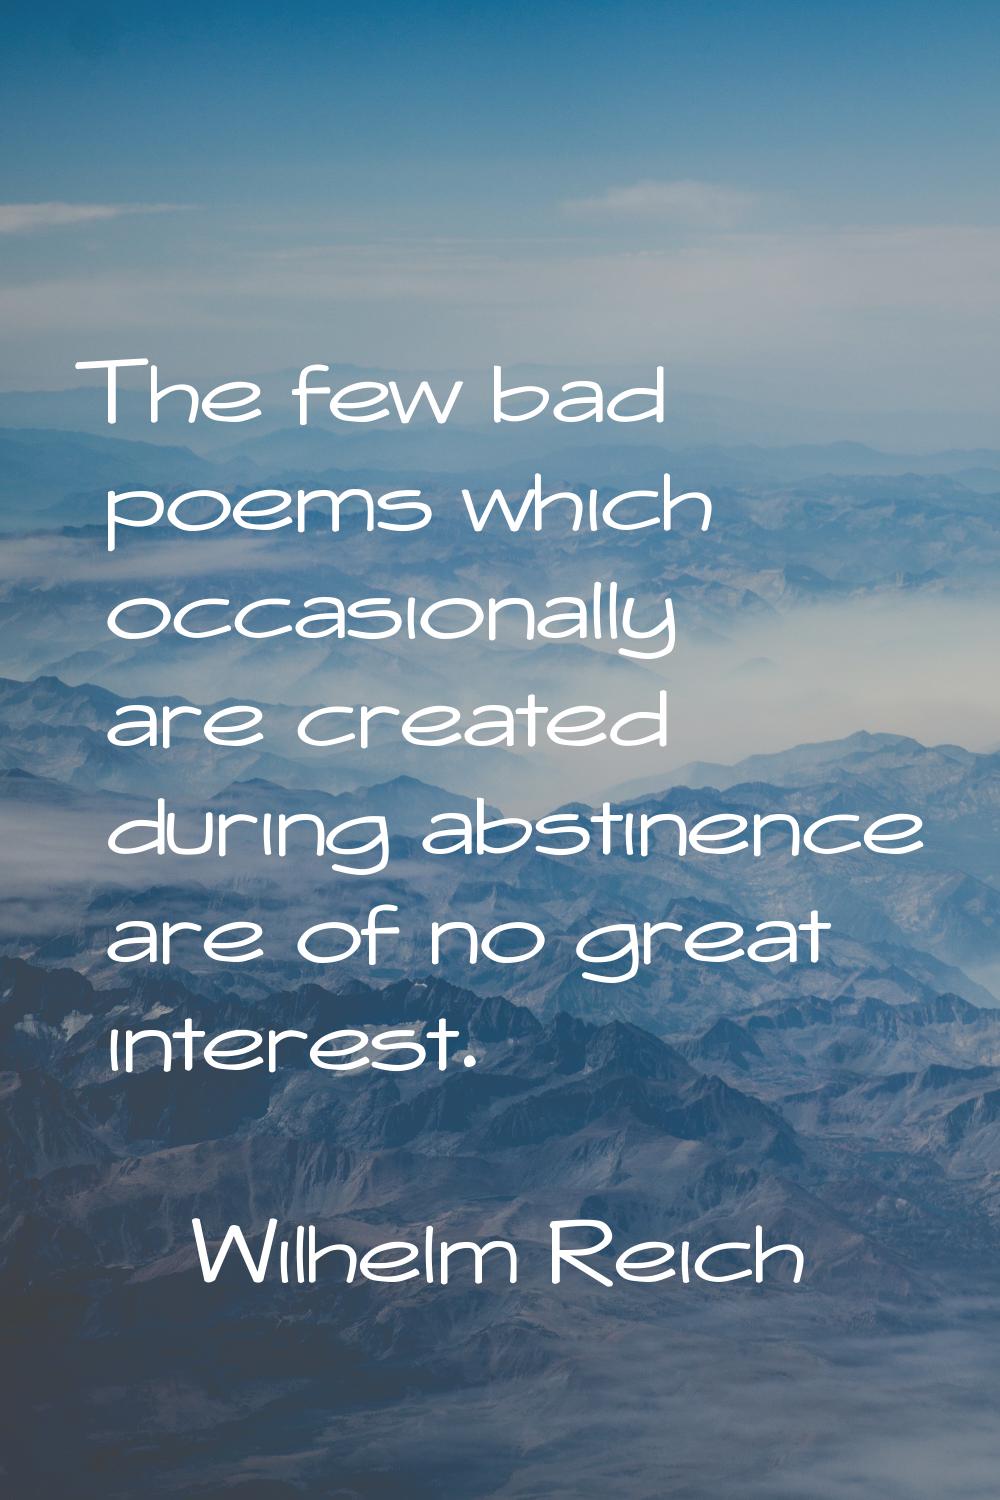 The few bad poems which occasionally are created during abstinence are of no great interest.